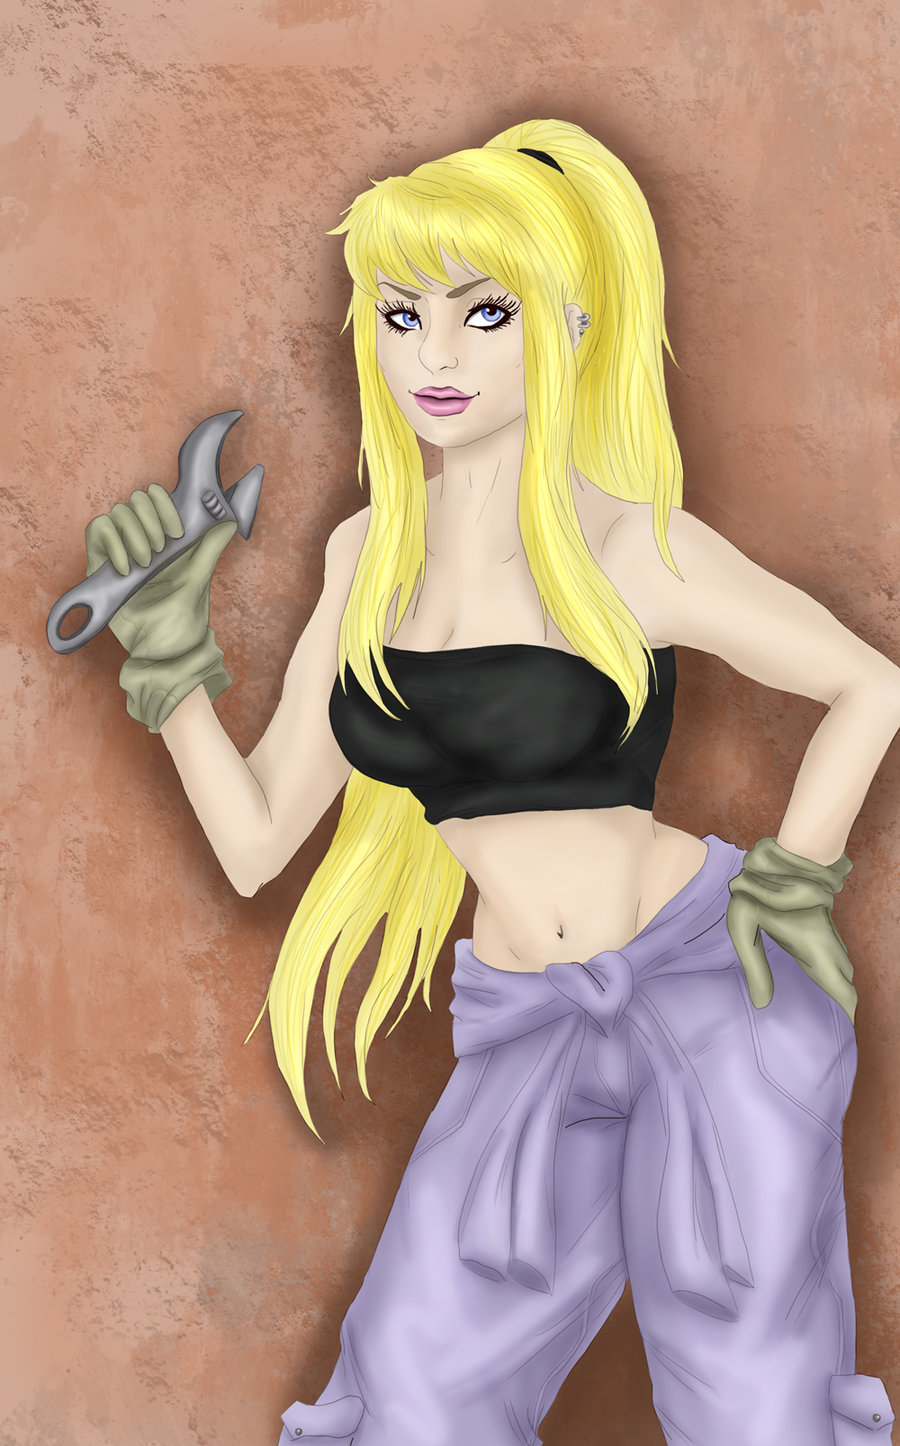 Winry Rockbell by kotalee